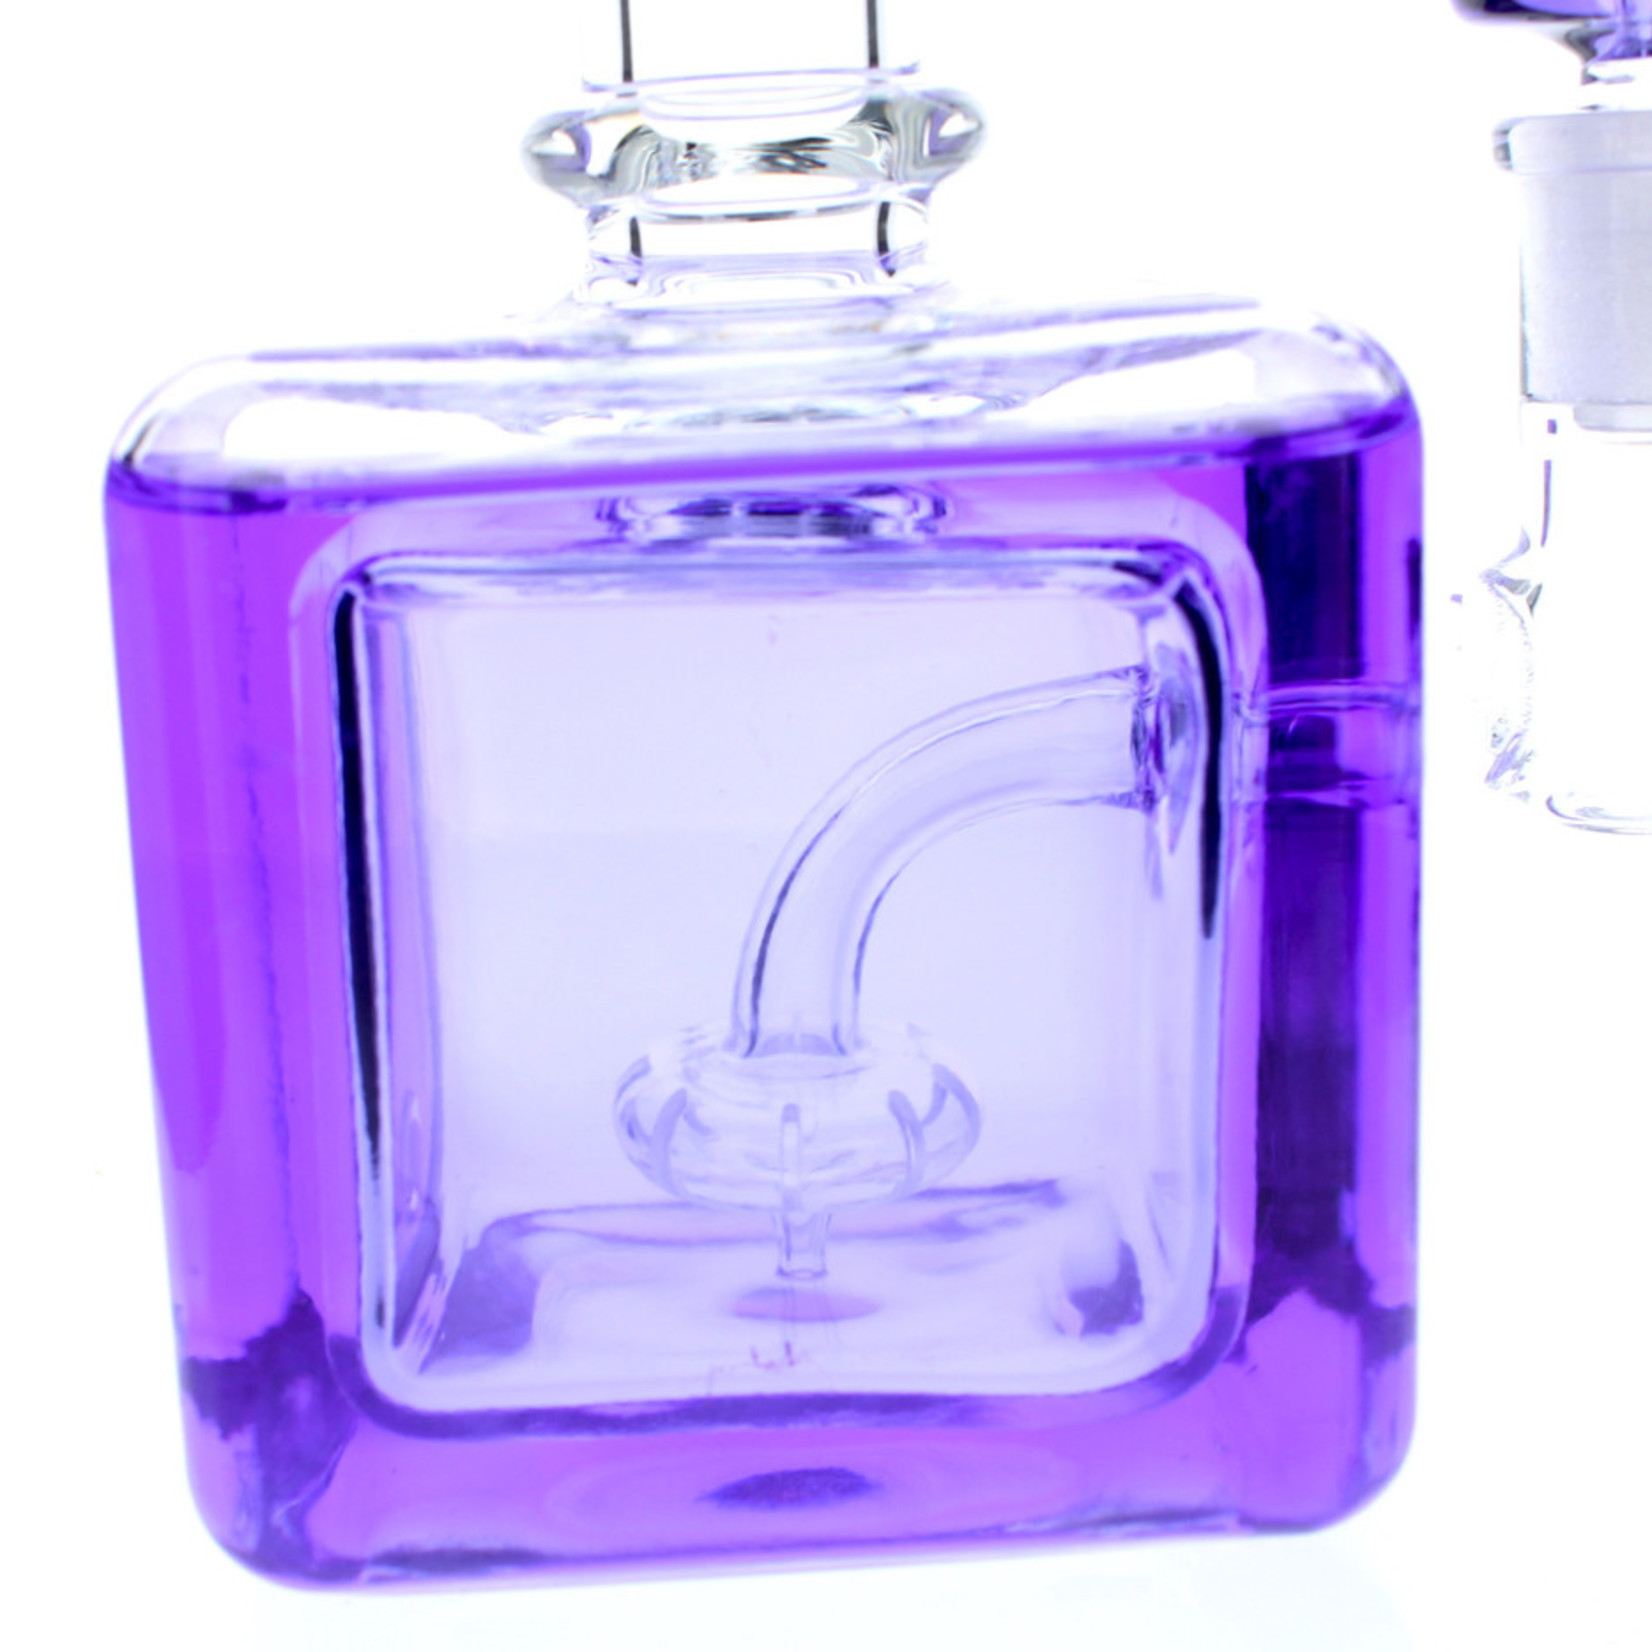 NO BRAND GLYCERIN FILLED CUBE BONG - VARIOUS COLORS